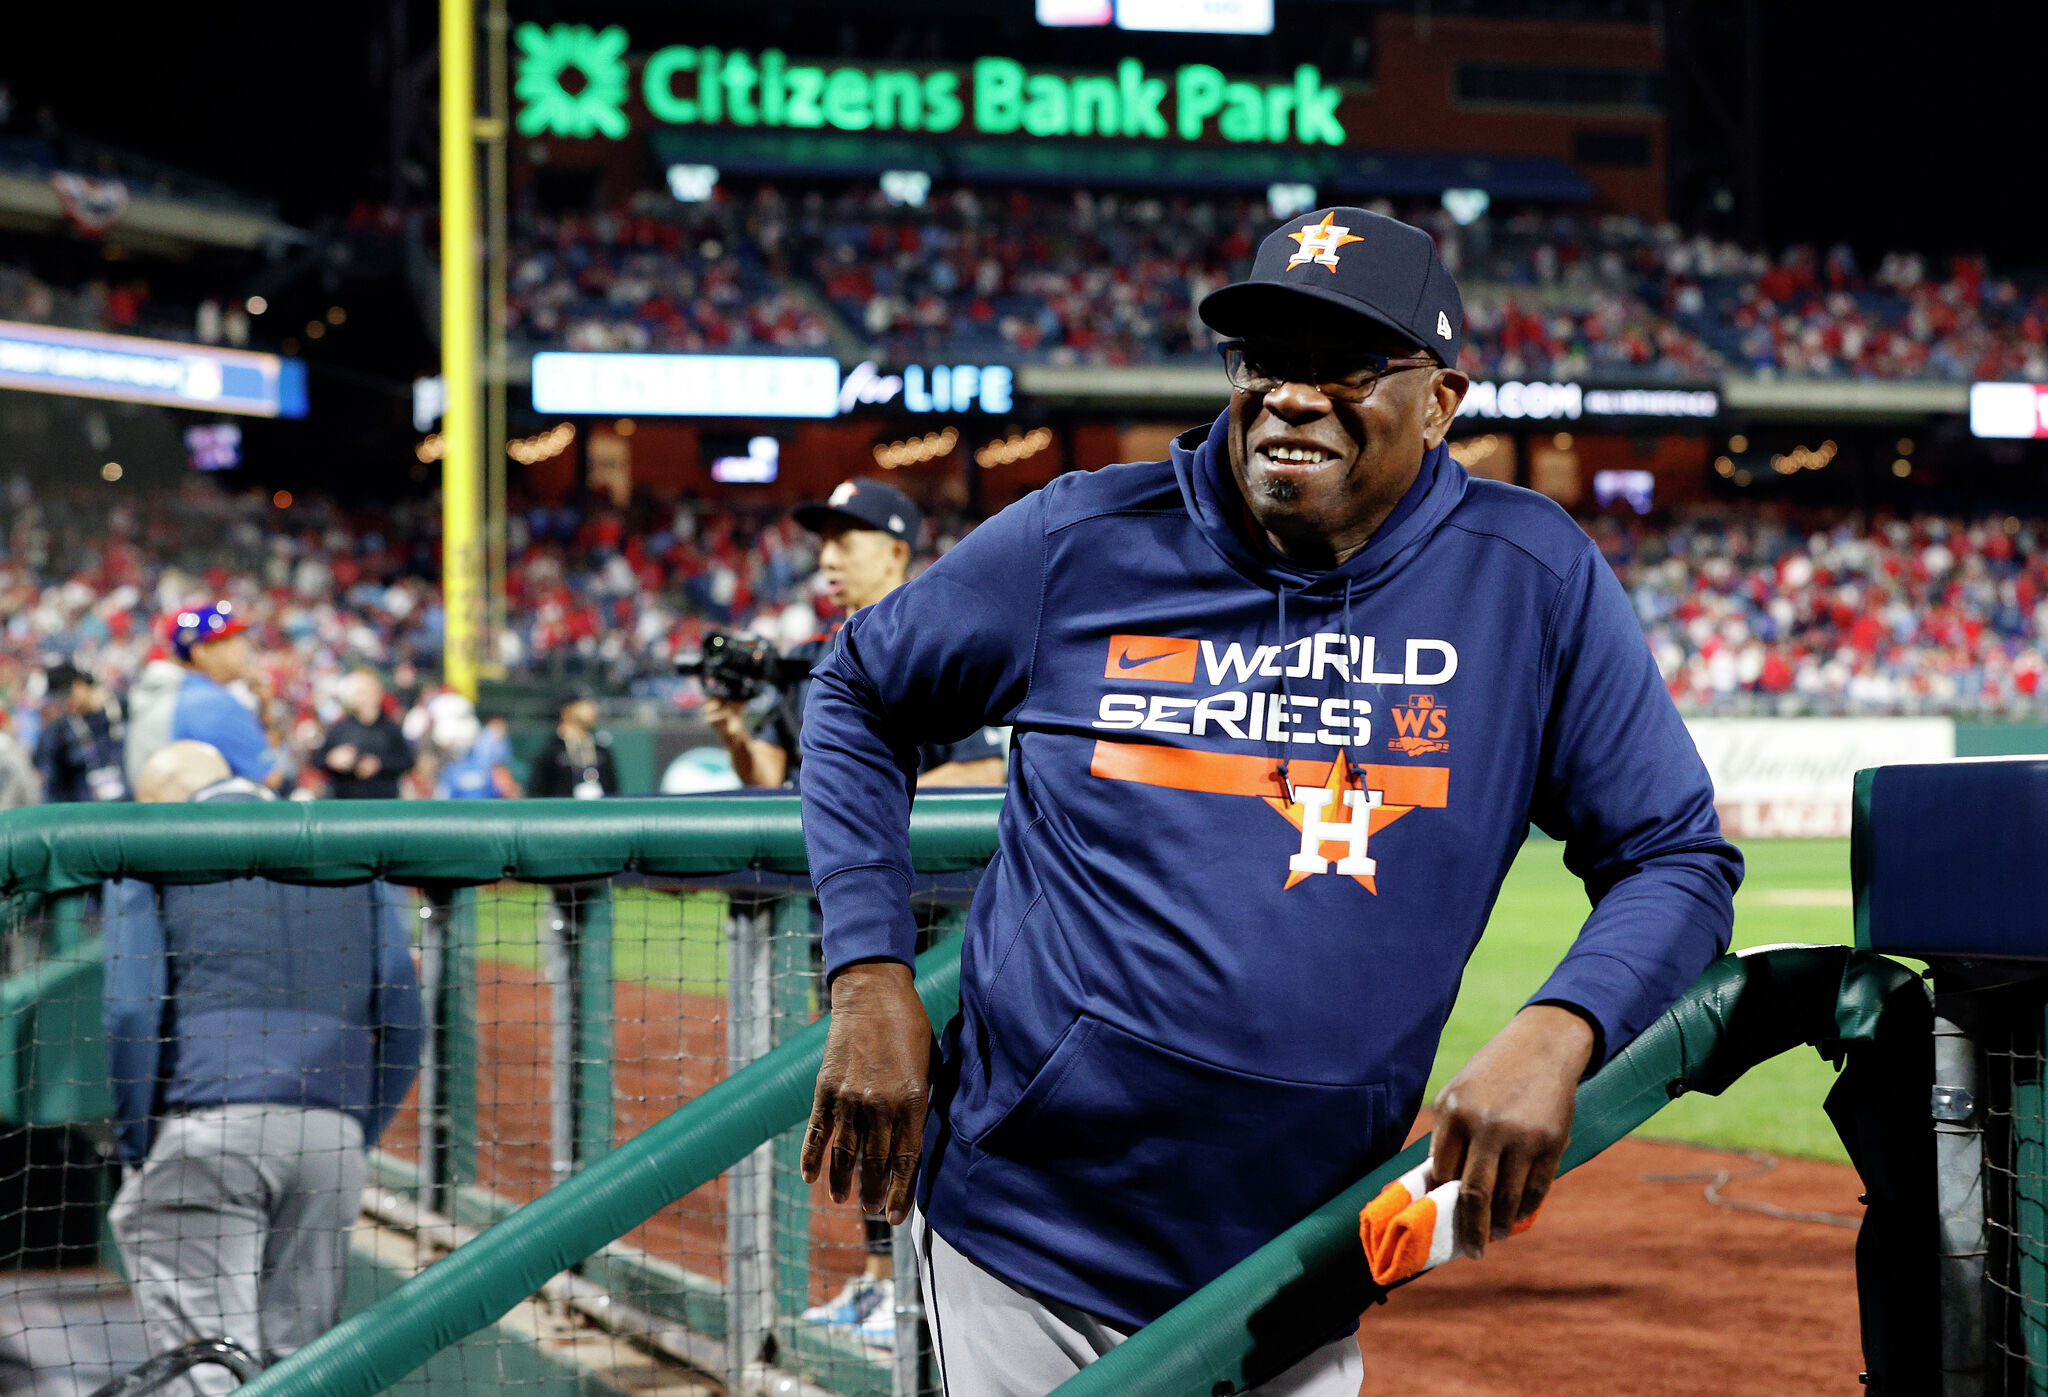 Dusty Baker to return as Astros manager after winning World Series